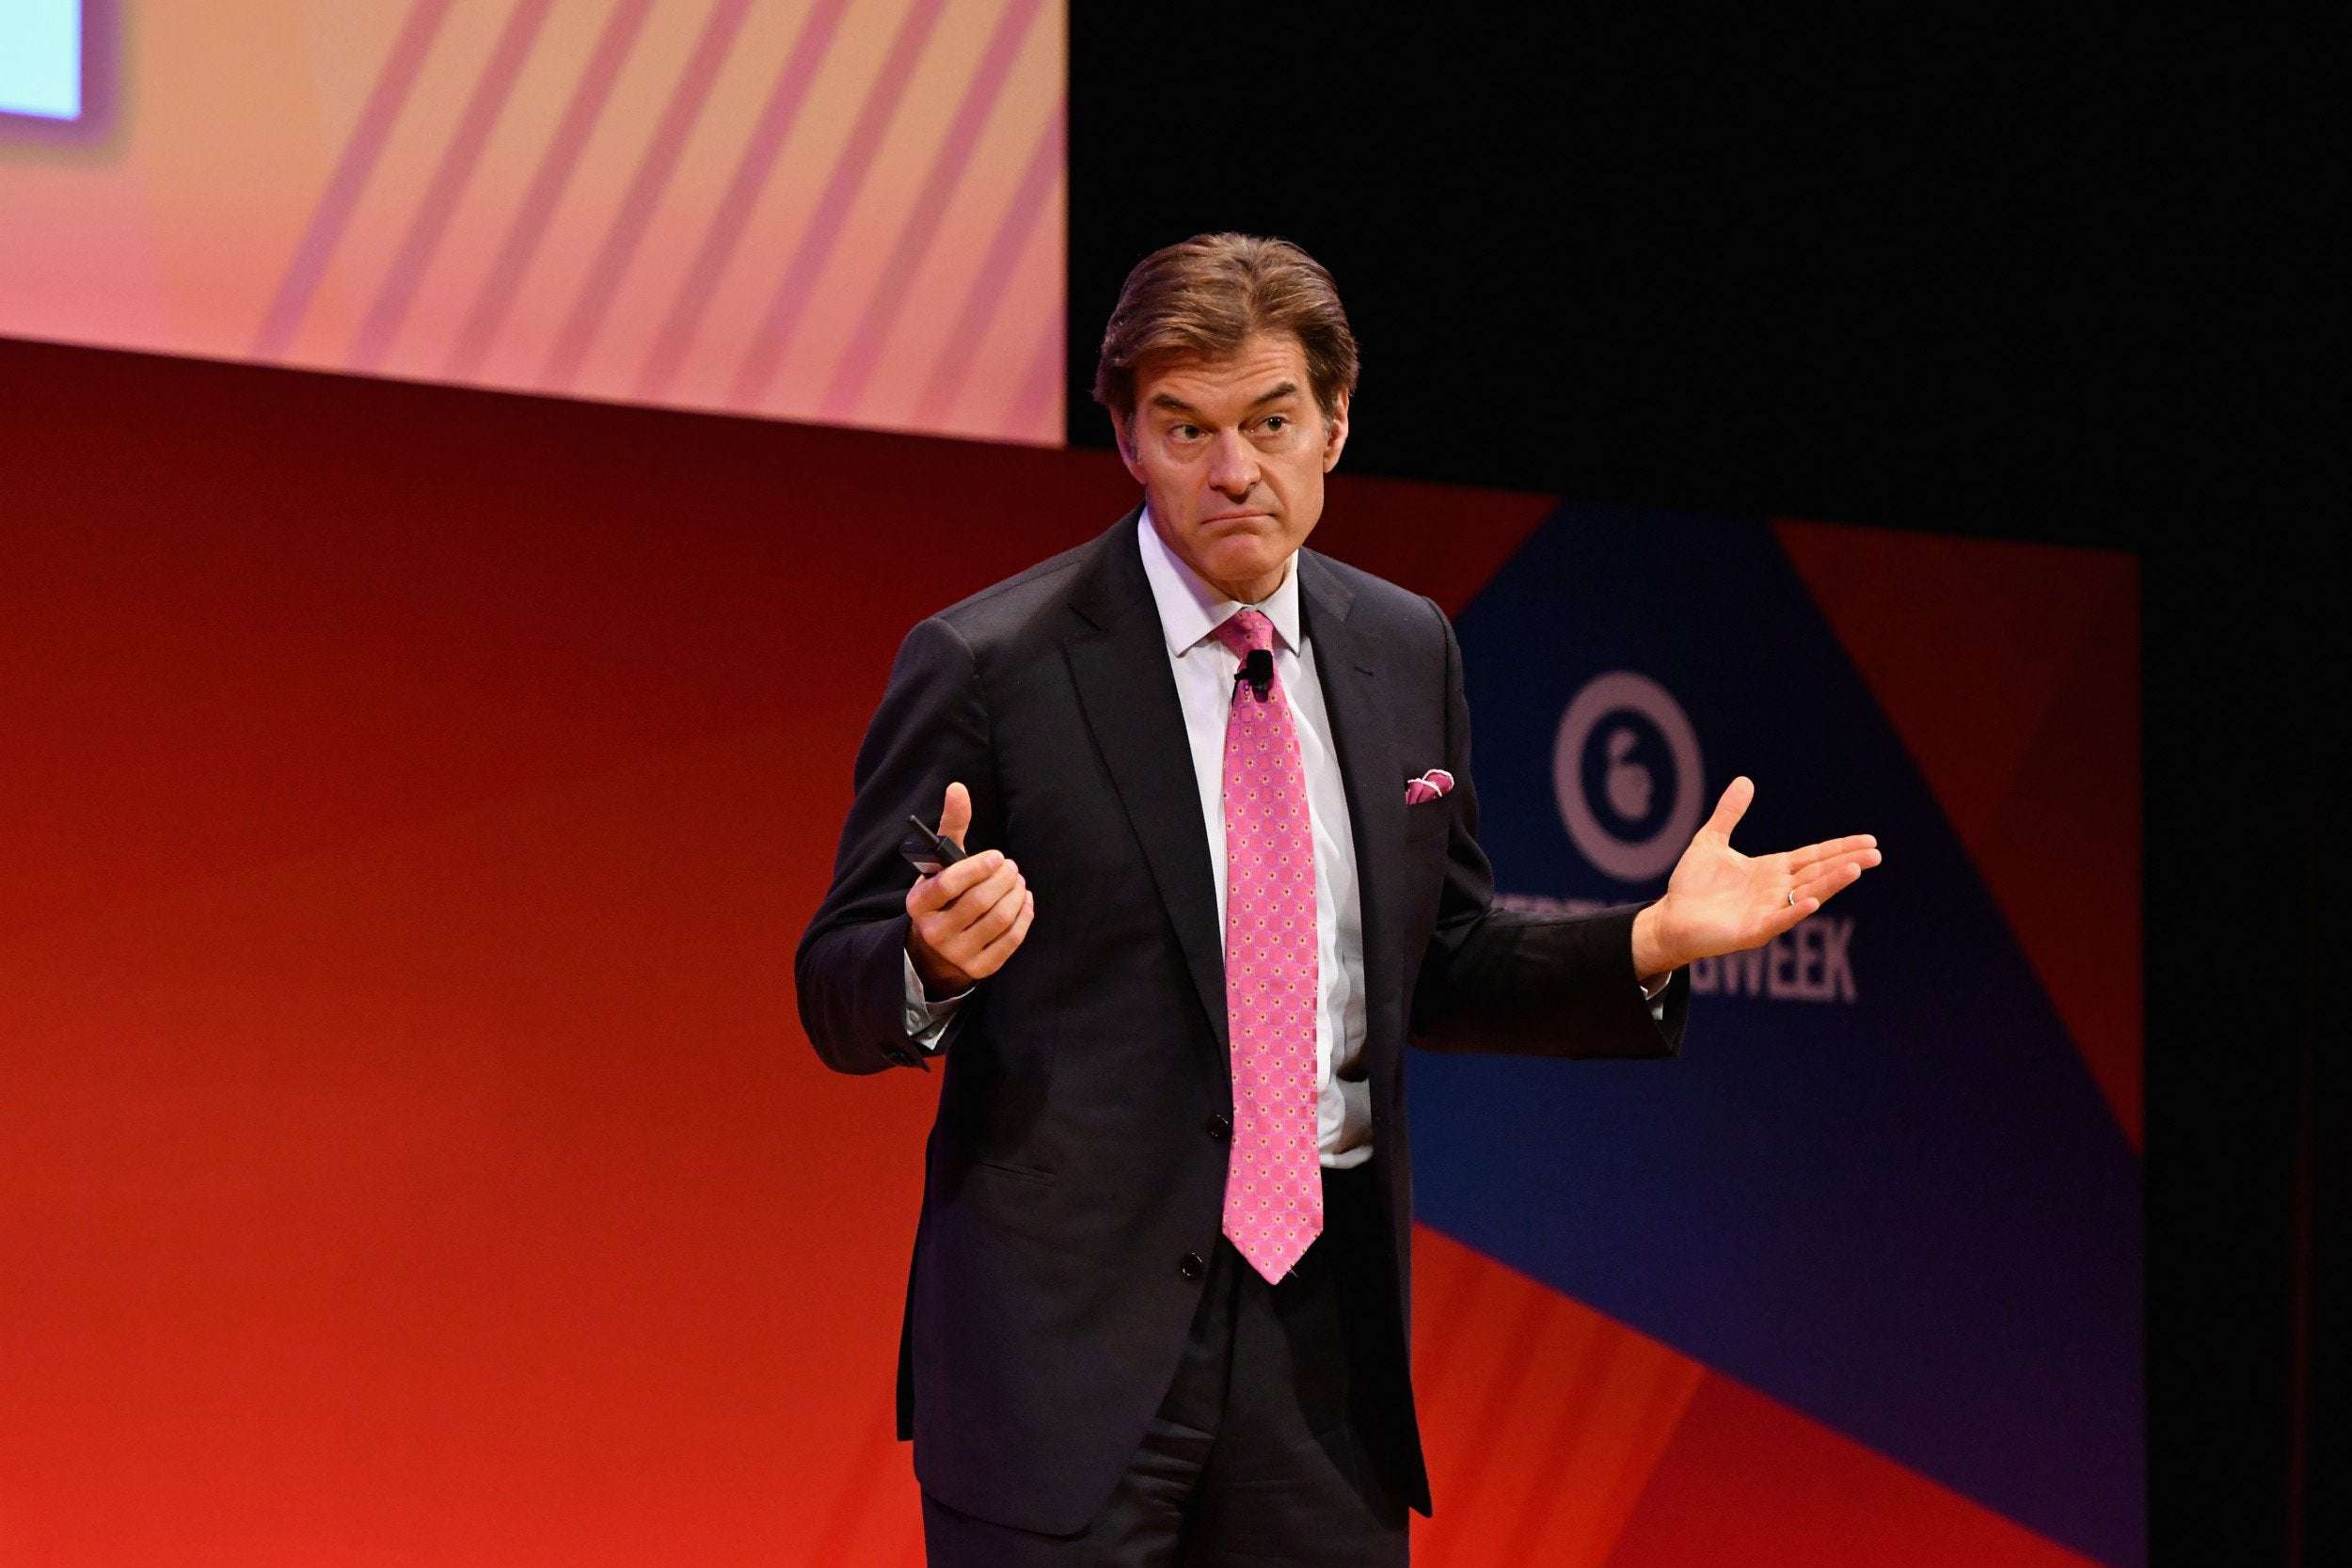 image for 'Dr. Oz' Colleagues Call Him 'Scam Artist' Amid Launch of U.S. Senate Candidacy in PA